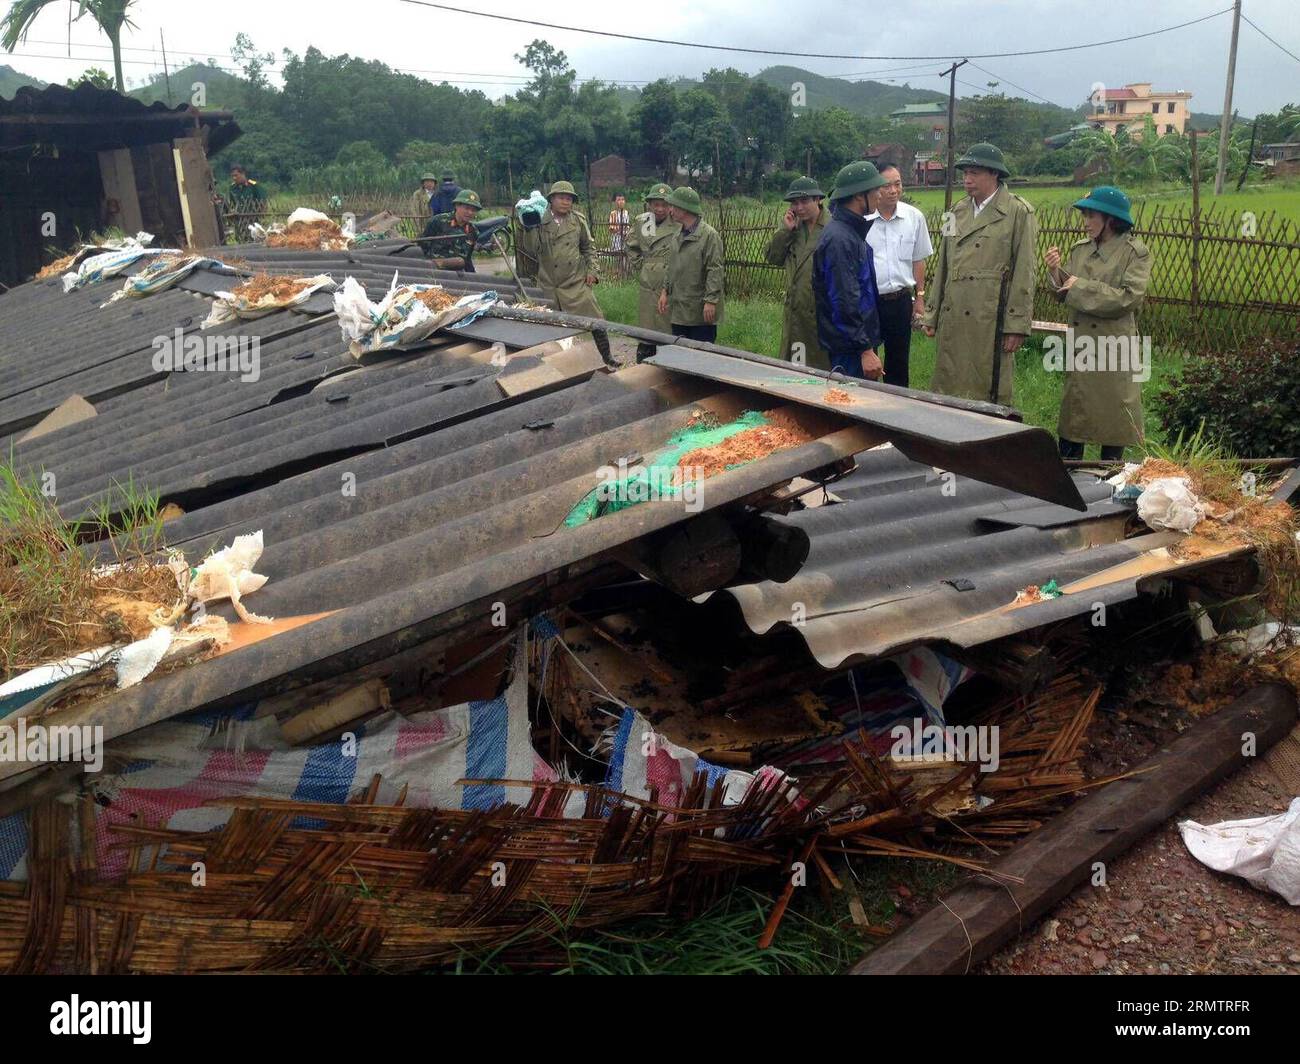 (140917) -- HANOI, Sept. 17, 2014 -- Photo taken on Sept. 17, 2014 shows a house destroyed by Typhoon Kalmaegi in Quang Ninh Province, Vietnam. It is believed that a total of seven people died in the Typhoon Kalmaegi, said the country s National Committee for Search and Rescue. ) VIETNAM-HANOI-TYPHOON-DAMAGE VNA PUBLICATIONxNOTxINxCHN   Hanoi Sept 17 2014 Photo Taken ON Sept 17 2014 Shows a House destroyed by Typhoon  in Quang Ninh Province Vietnam IT IS believed Thatcher a total of Seven Celebrities died in The Typhoon  Said The Country S National Committee for Search and Rescue Vietnam Hanoi Stock Photo